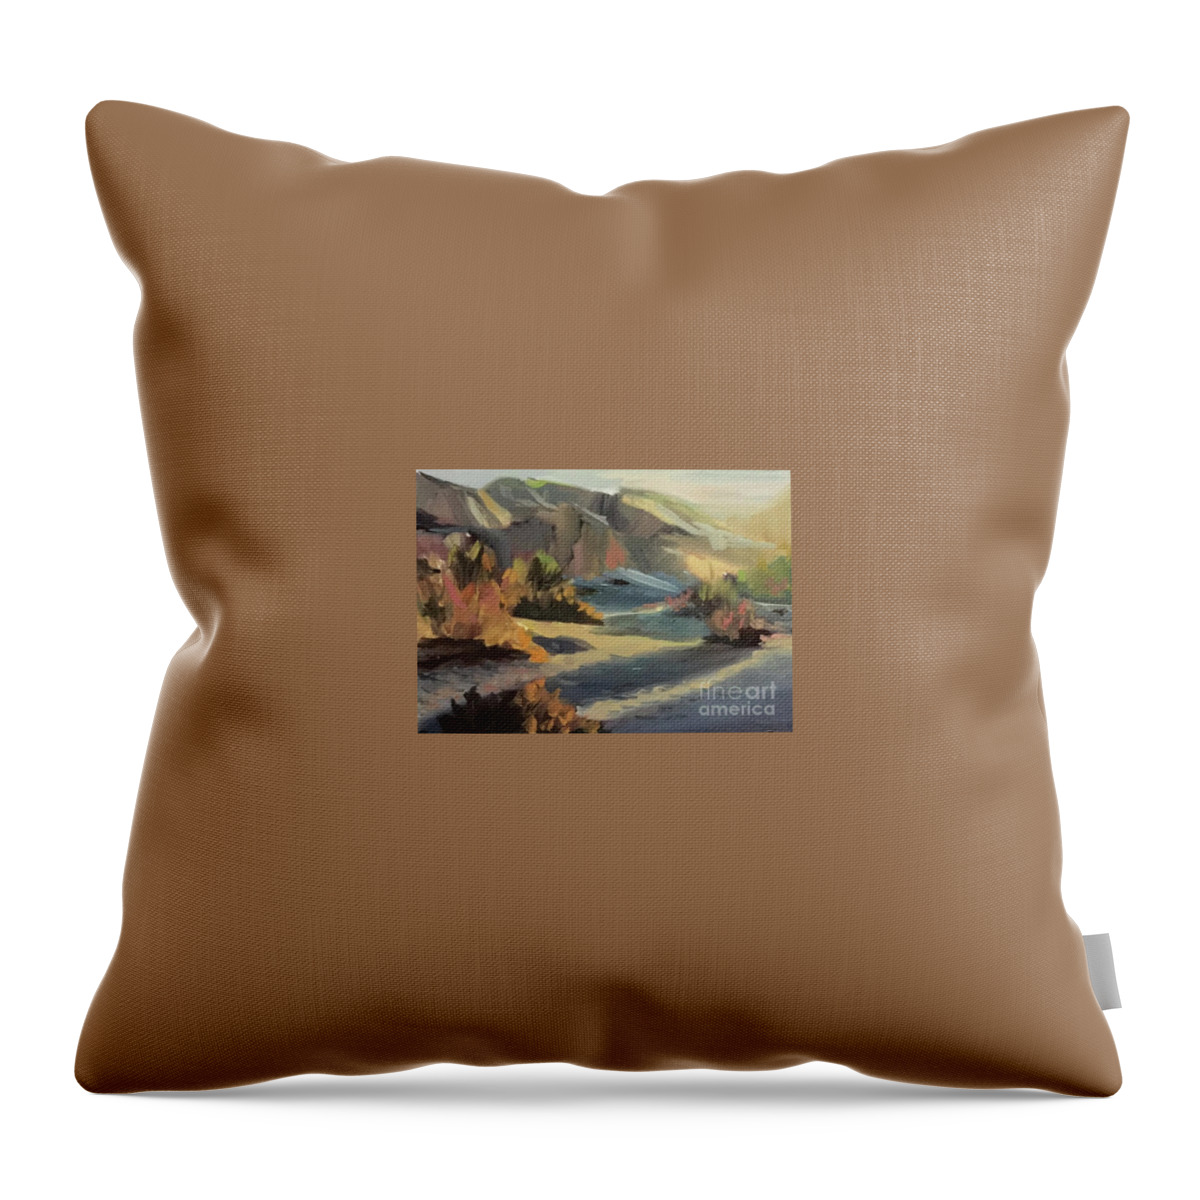 Morning Throw Pillow featuring the painting Dessert Dawn by Lori Ippolito